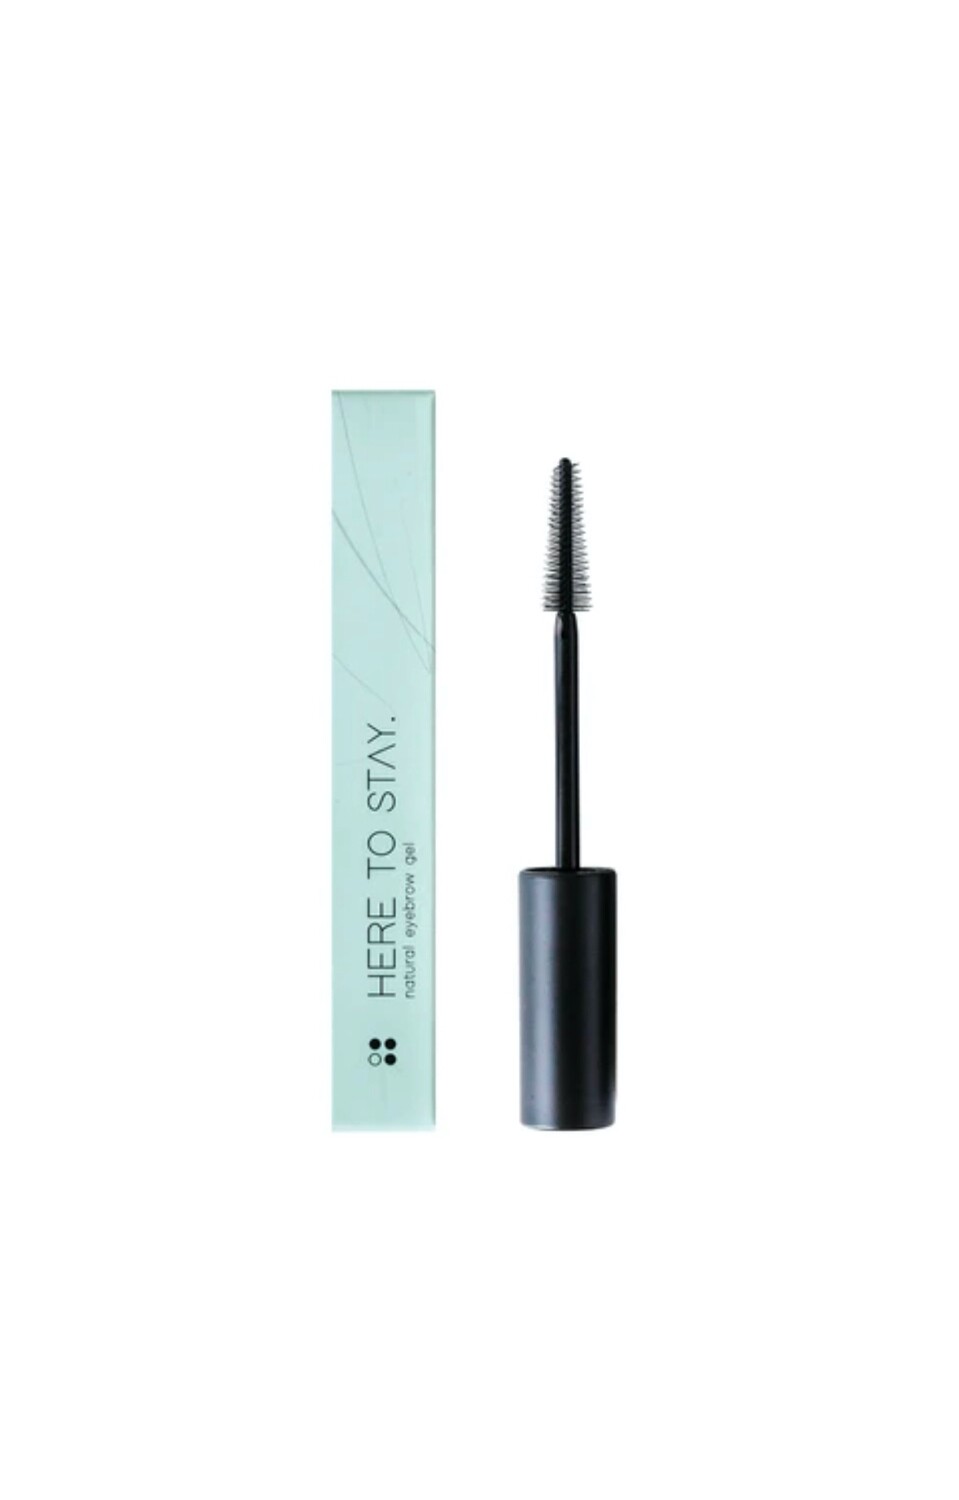 Here to Stay - Natural Eyebrow gel